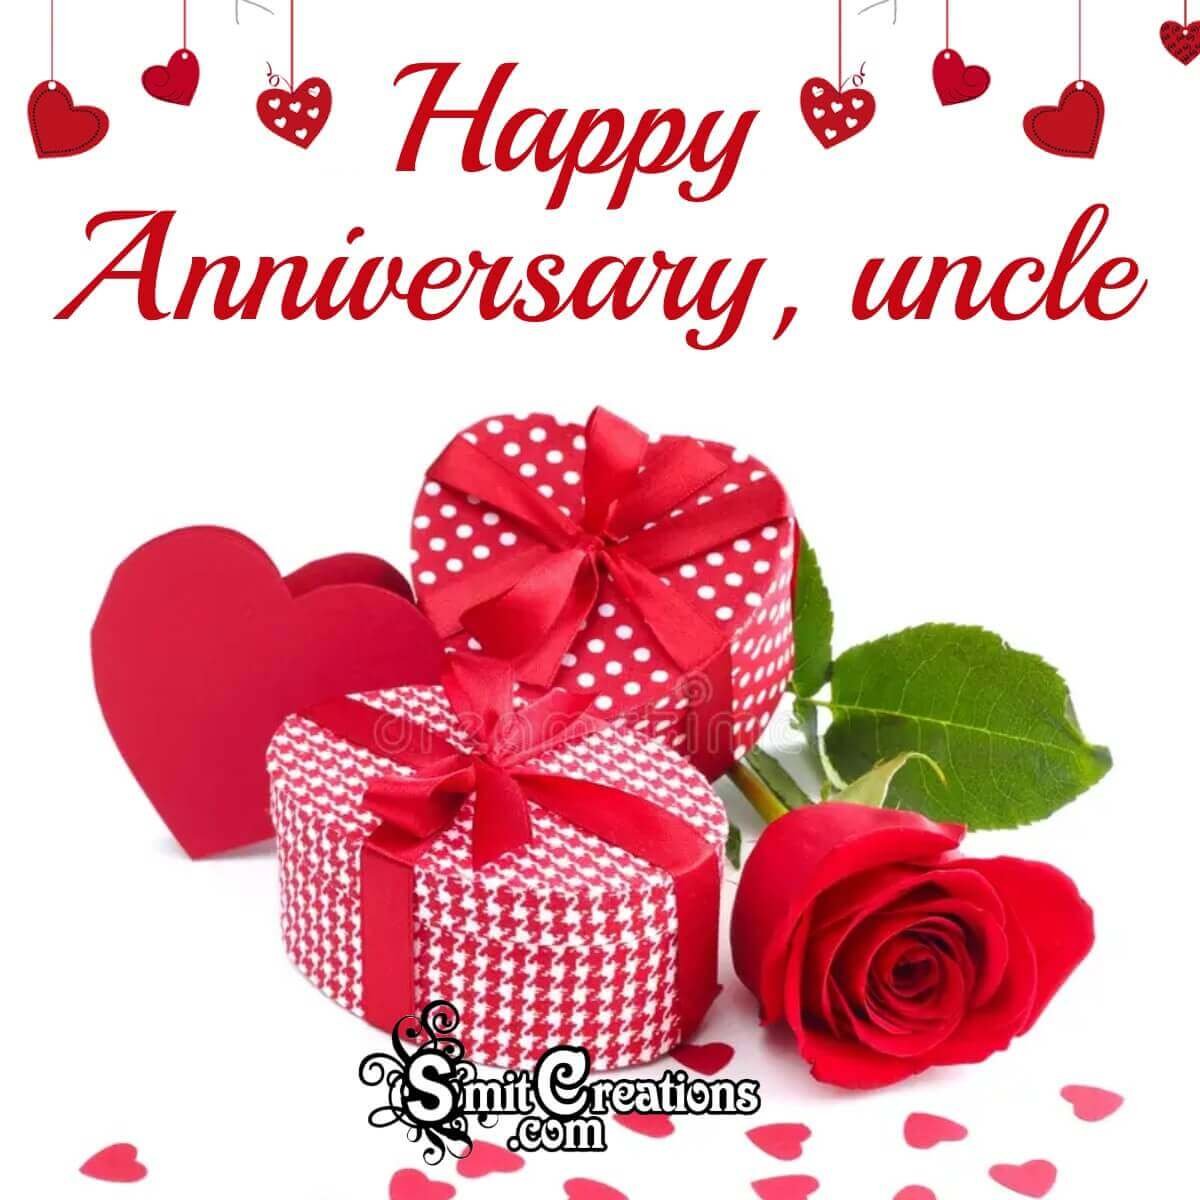 Happy Anniversary Wishing Photo For Uncle